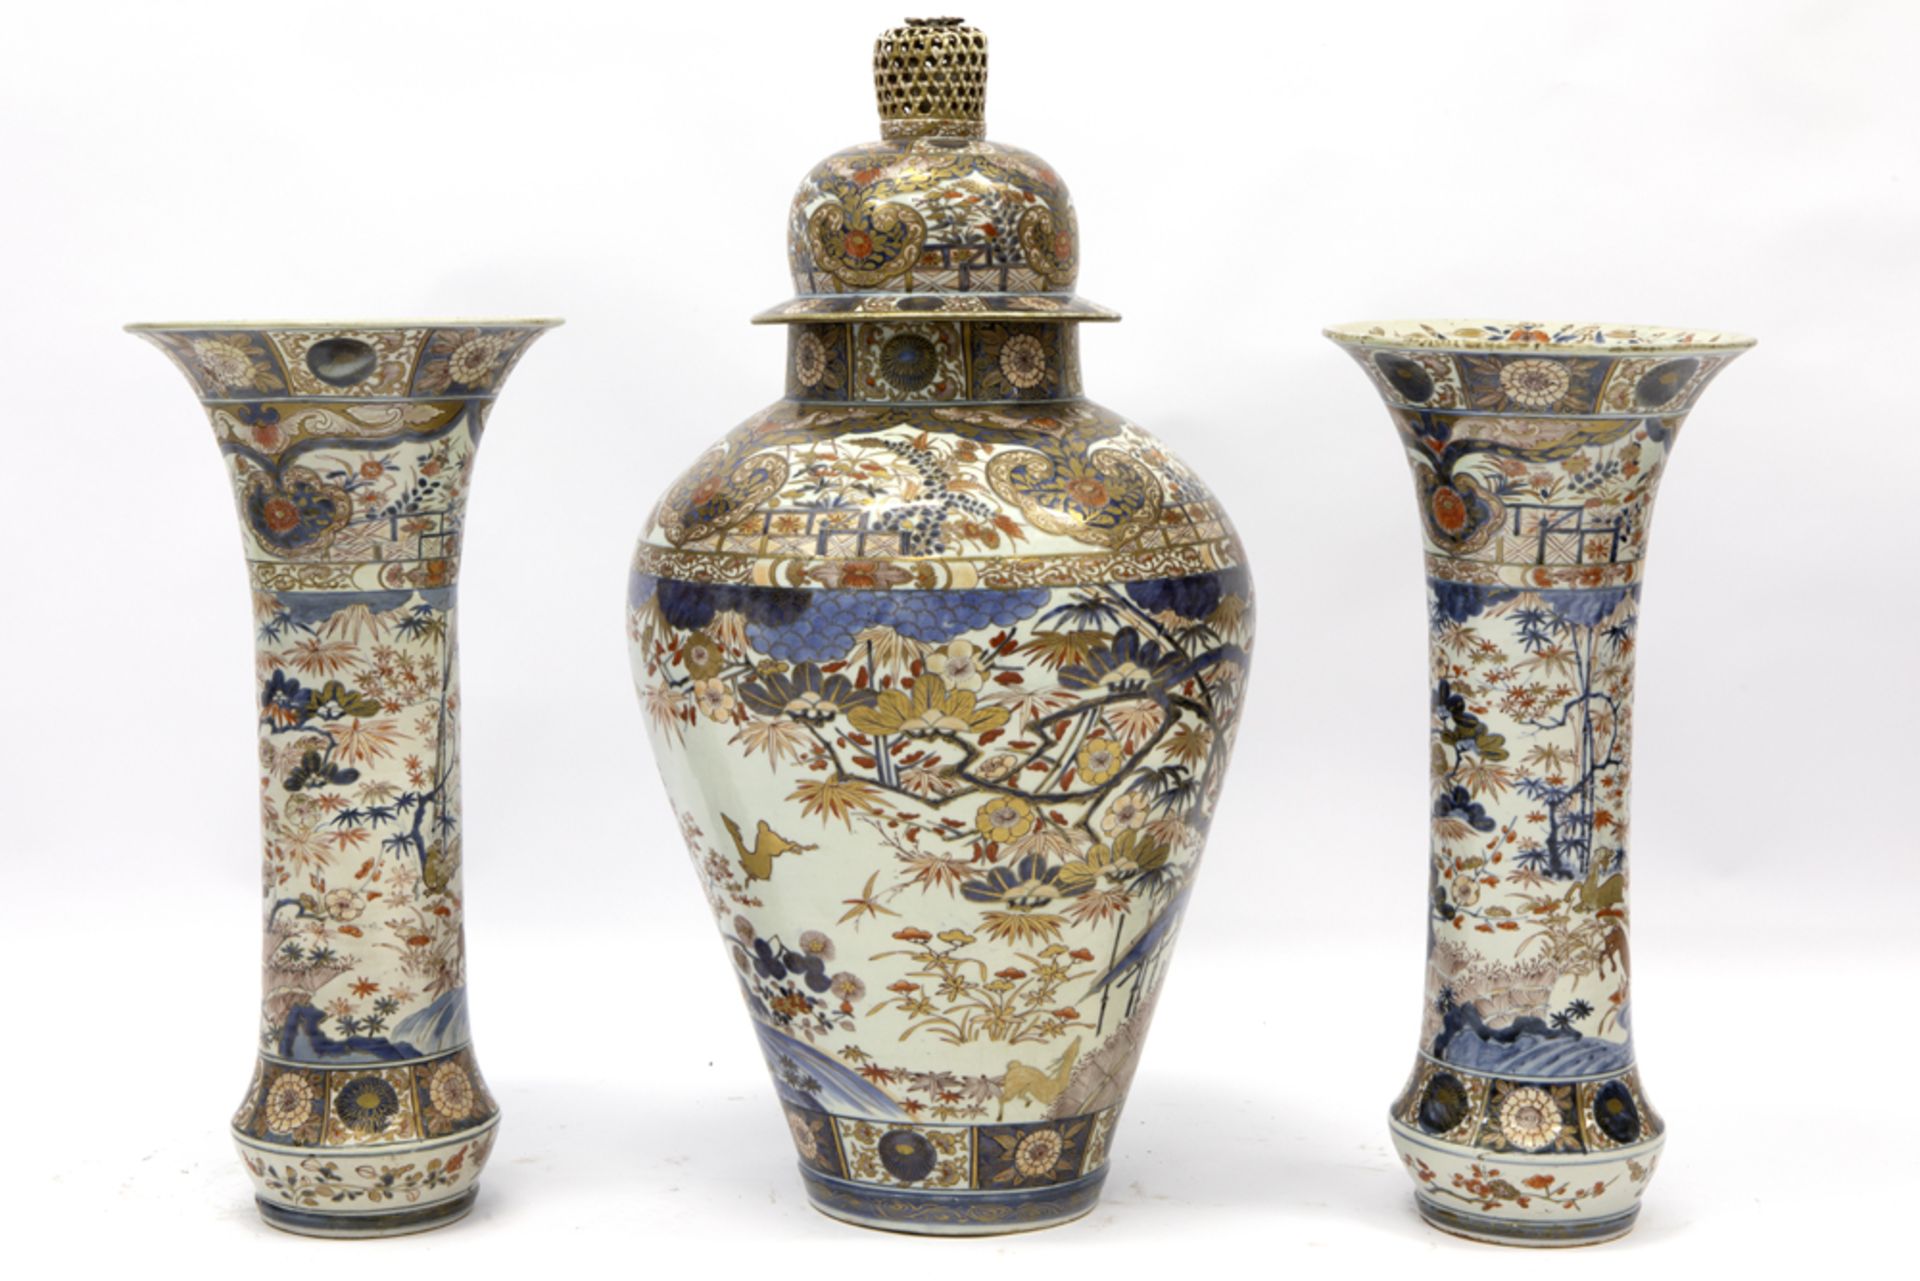 antique imposing 3pc garniture in porcelain with a fine Imari decor : a pair of vases and a vase - Image 3 of 5